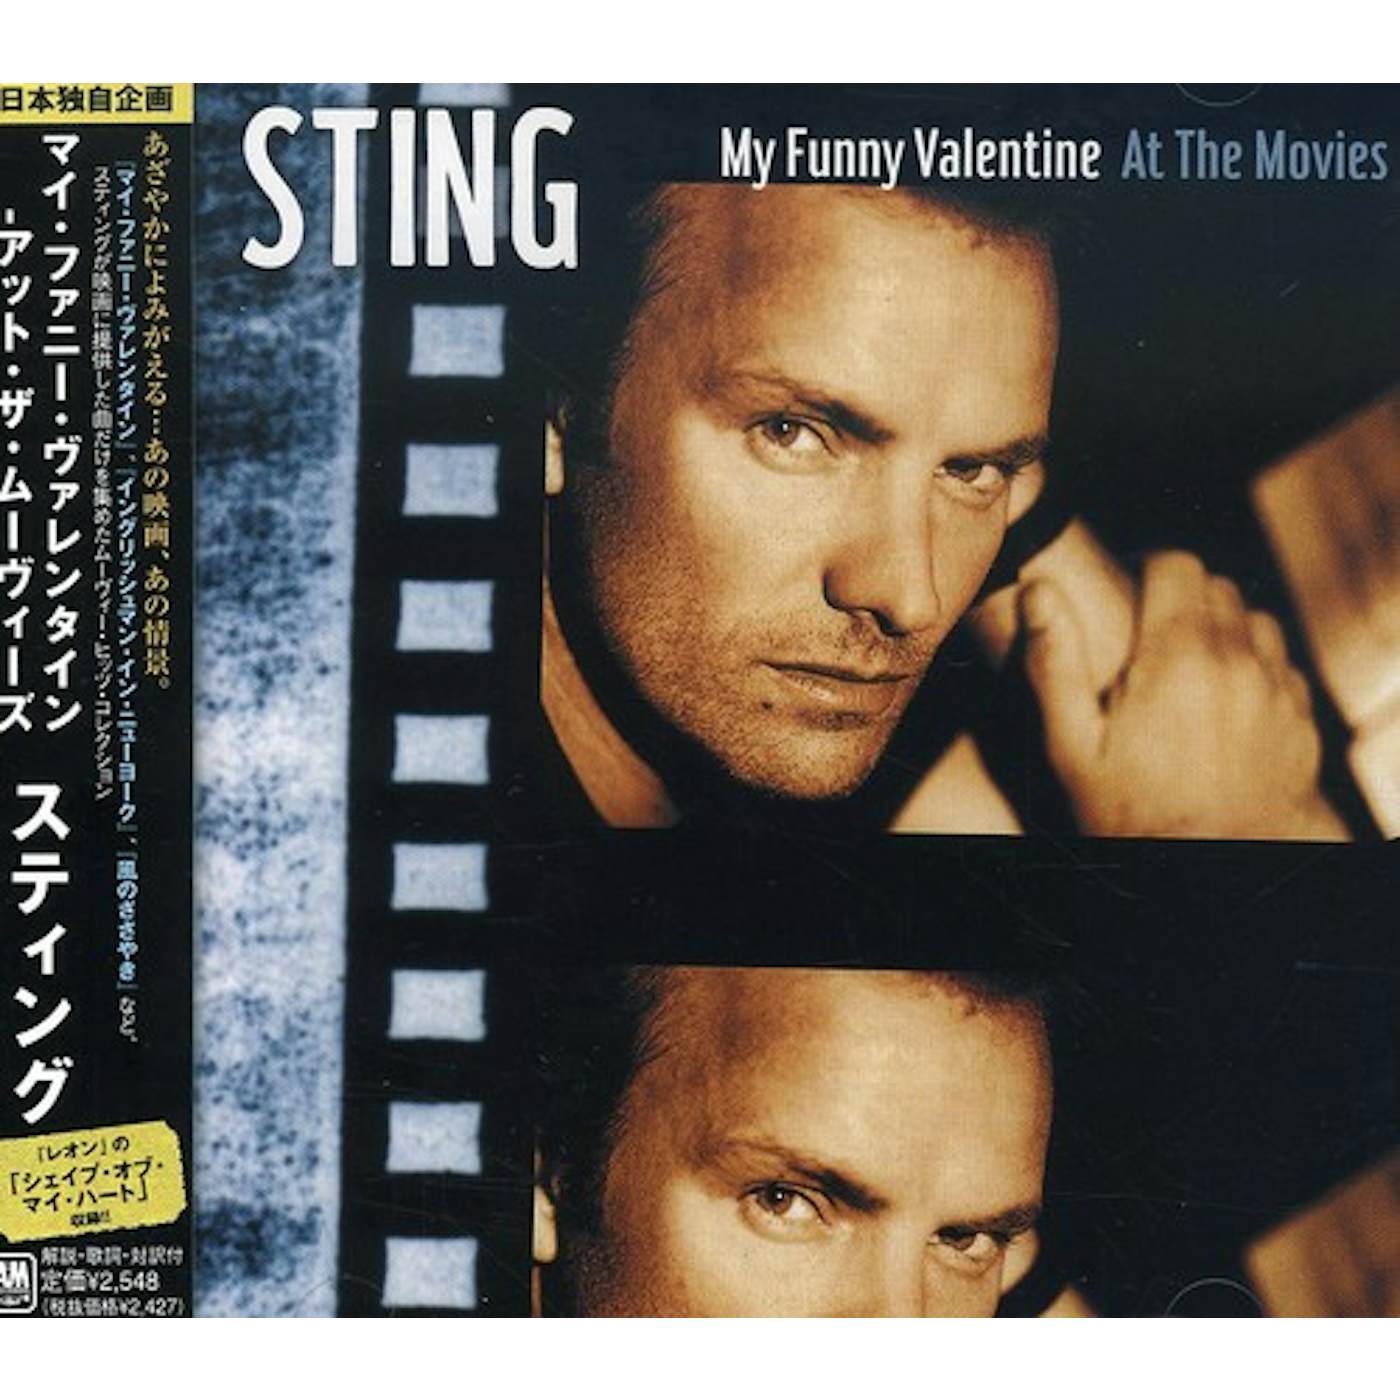 MY FUNNY VALENTINE: STING AT THE MOVIES CD